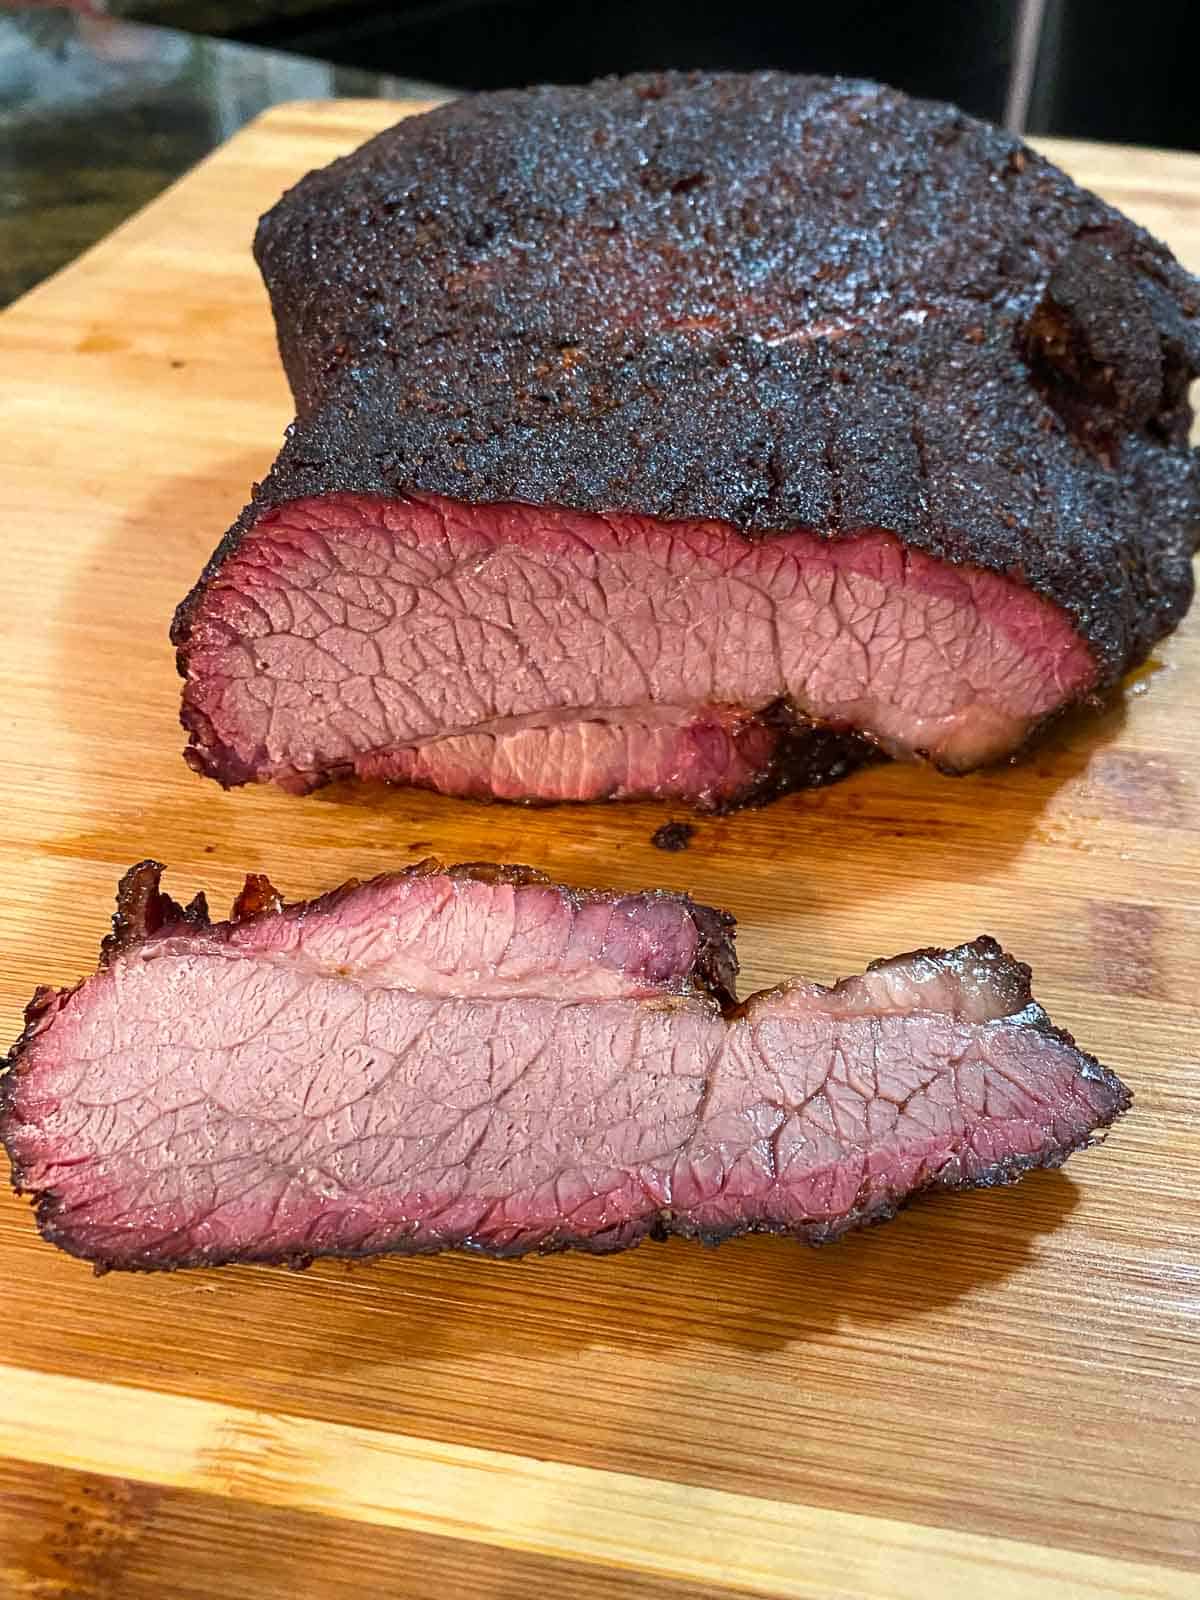 Finished brisket sliced on cutting board up close